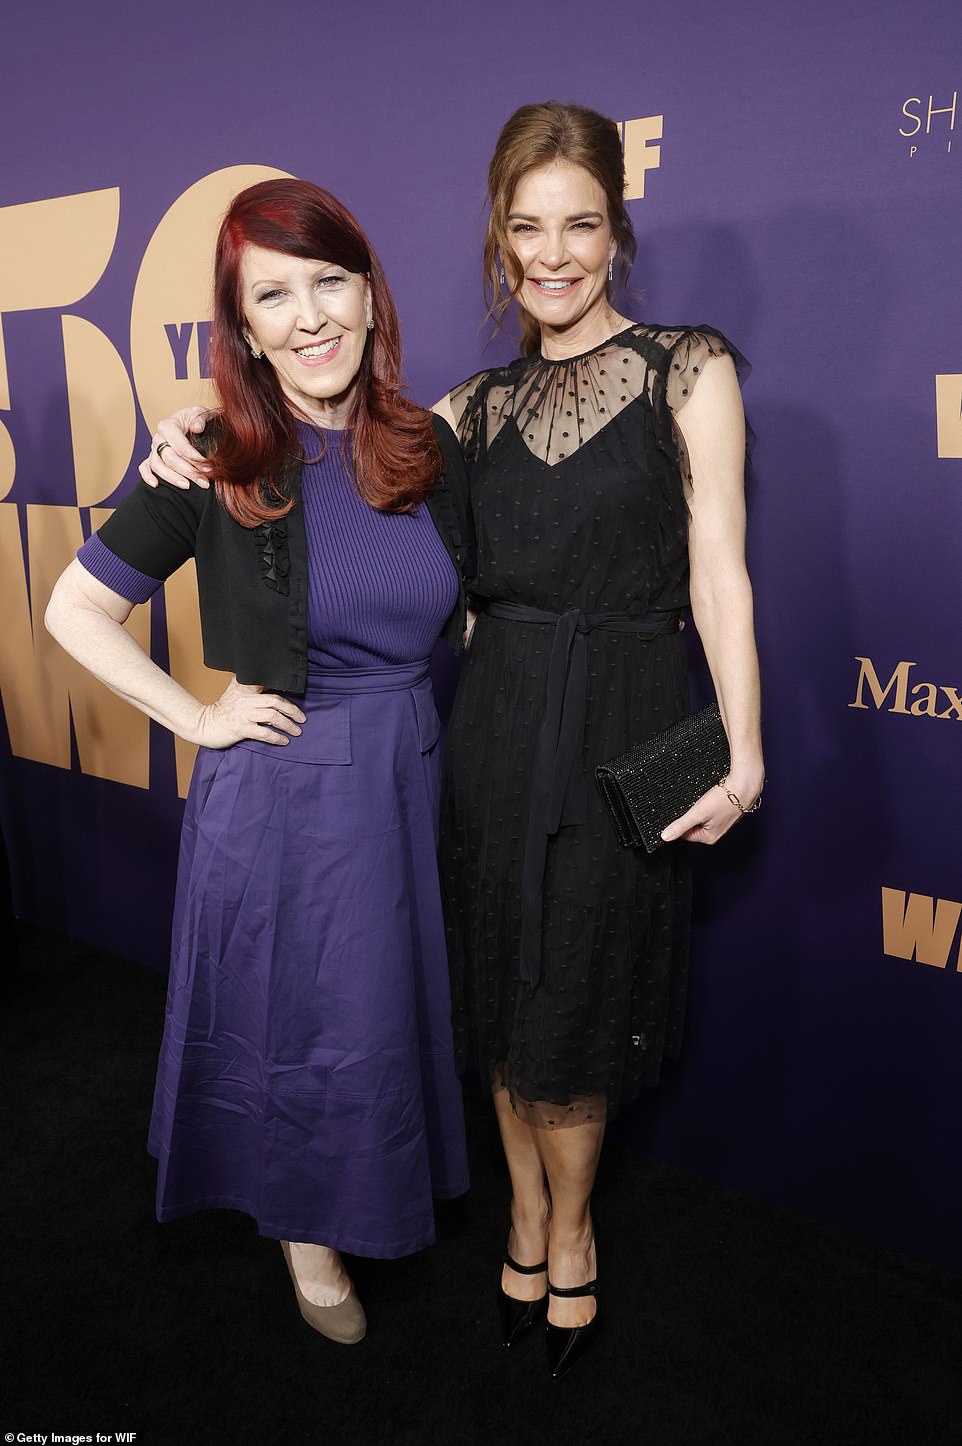 On the red carpet, Flannery was seen posing with Betsy Brandt ¿ who oped for a polkadot, all-black ensemble for the star-studded bash. The Breaking Bad star carried a sparkling clutch purse and sported pointed-toe Mary Jane heels